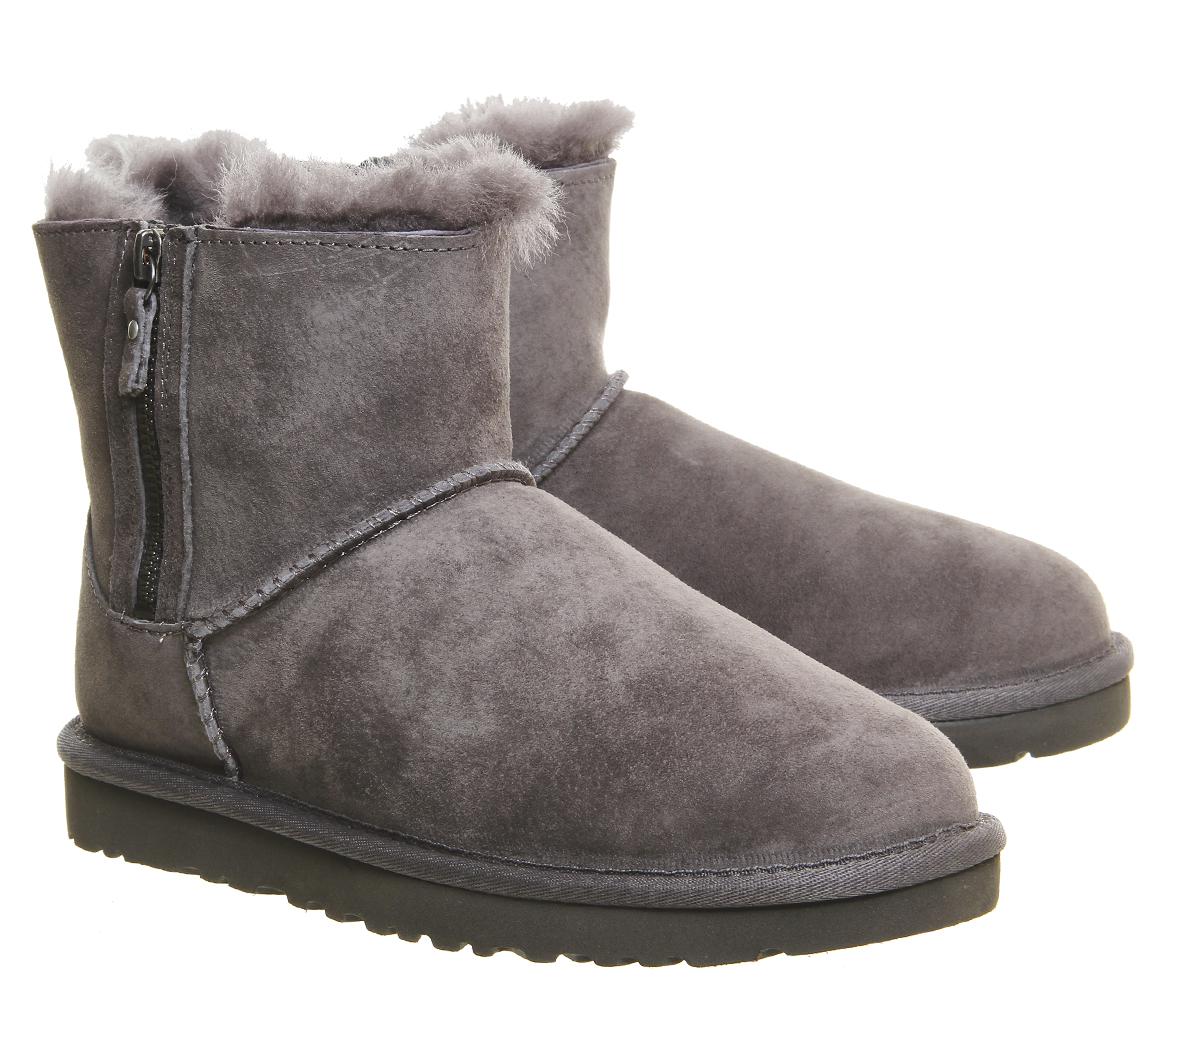 Ugg Classic Mini Double Zip Boots Hotsell, SAVE 50%.